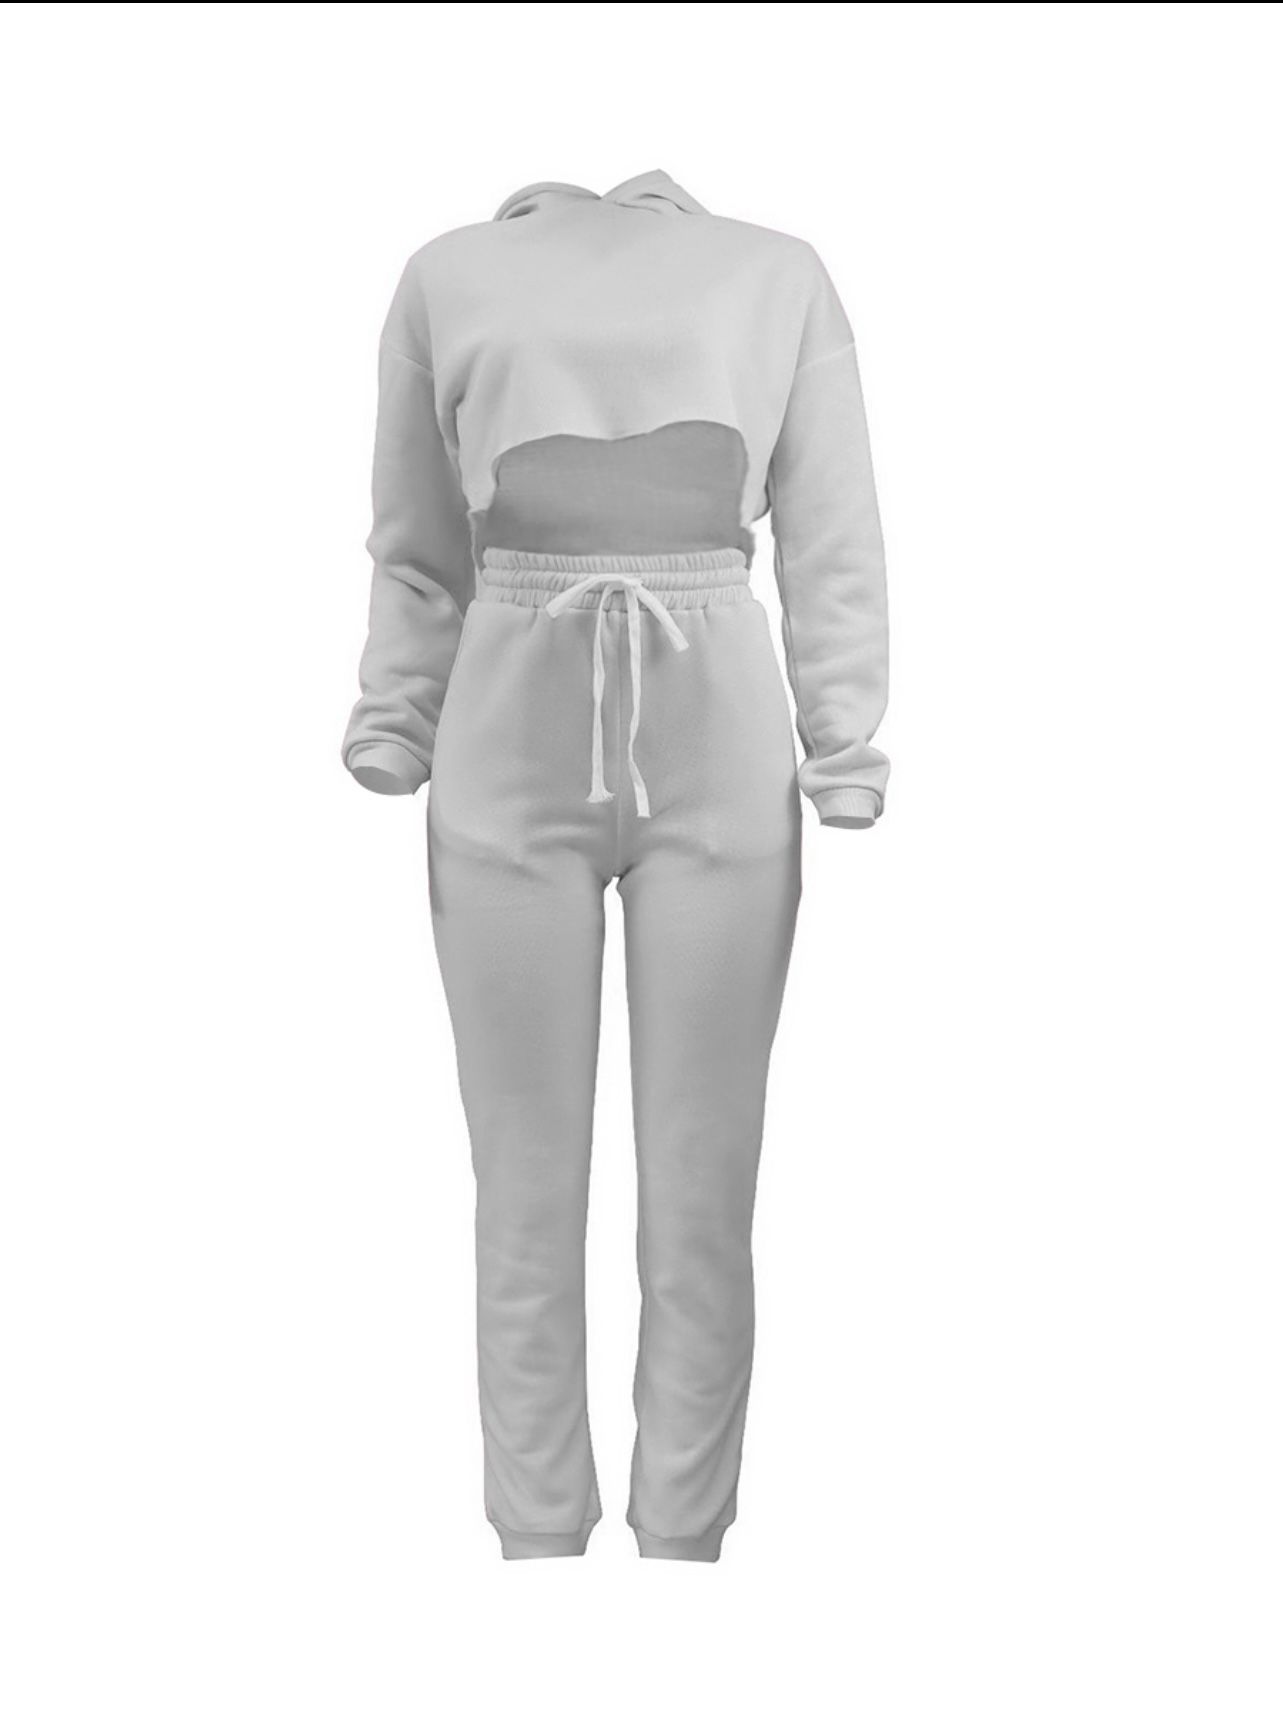 women’s size small sweat suits grey, baby blue $30.00 each